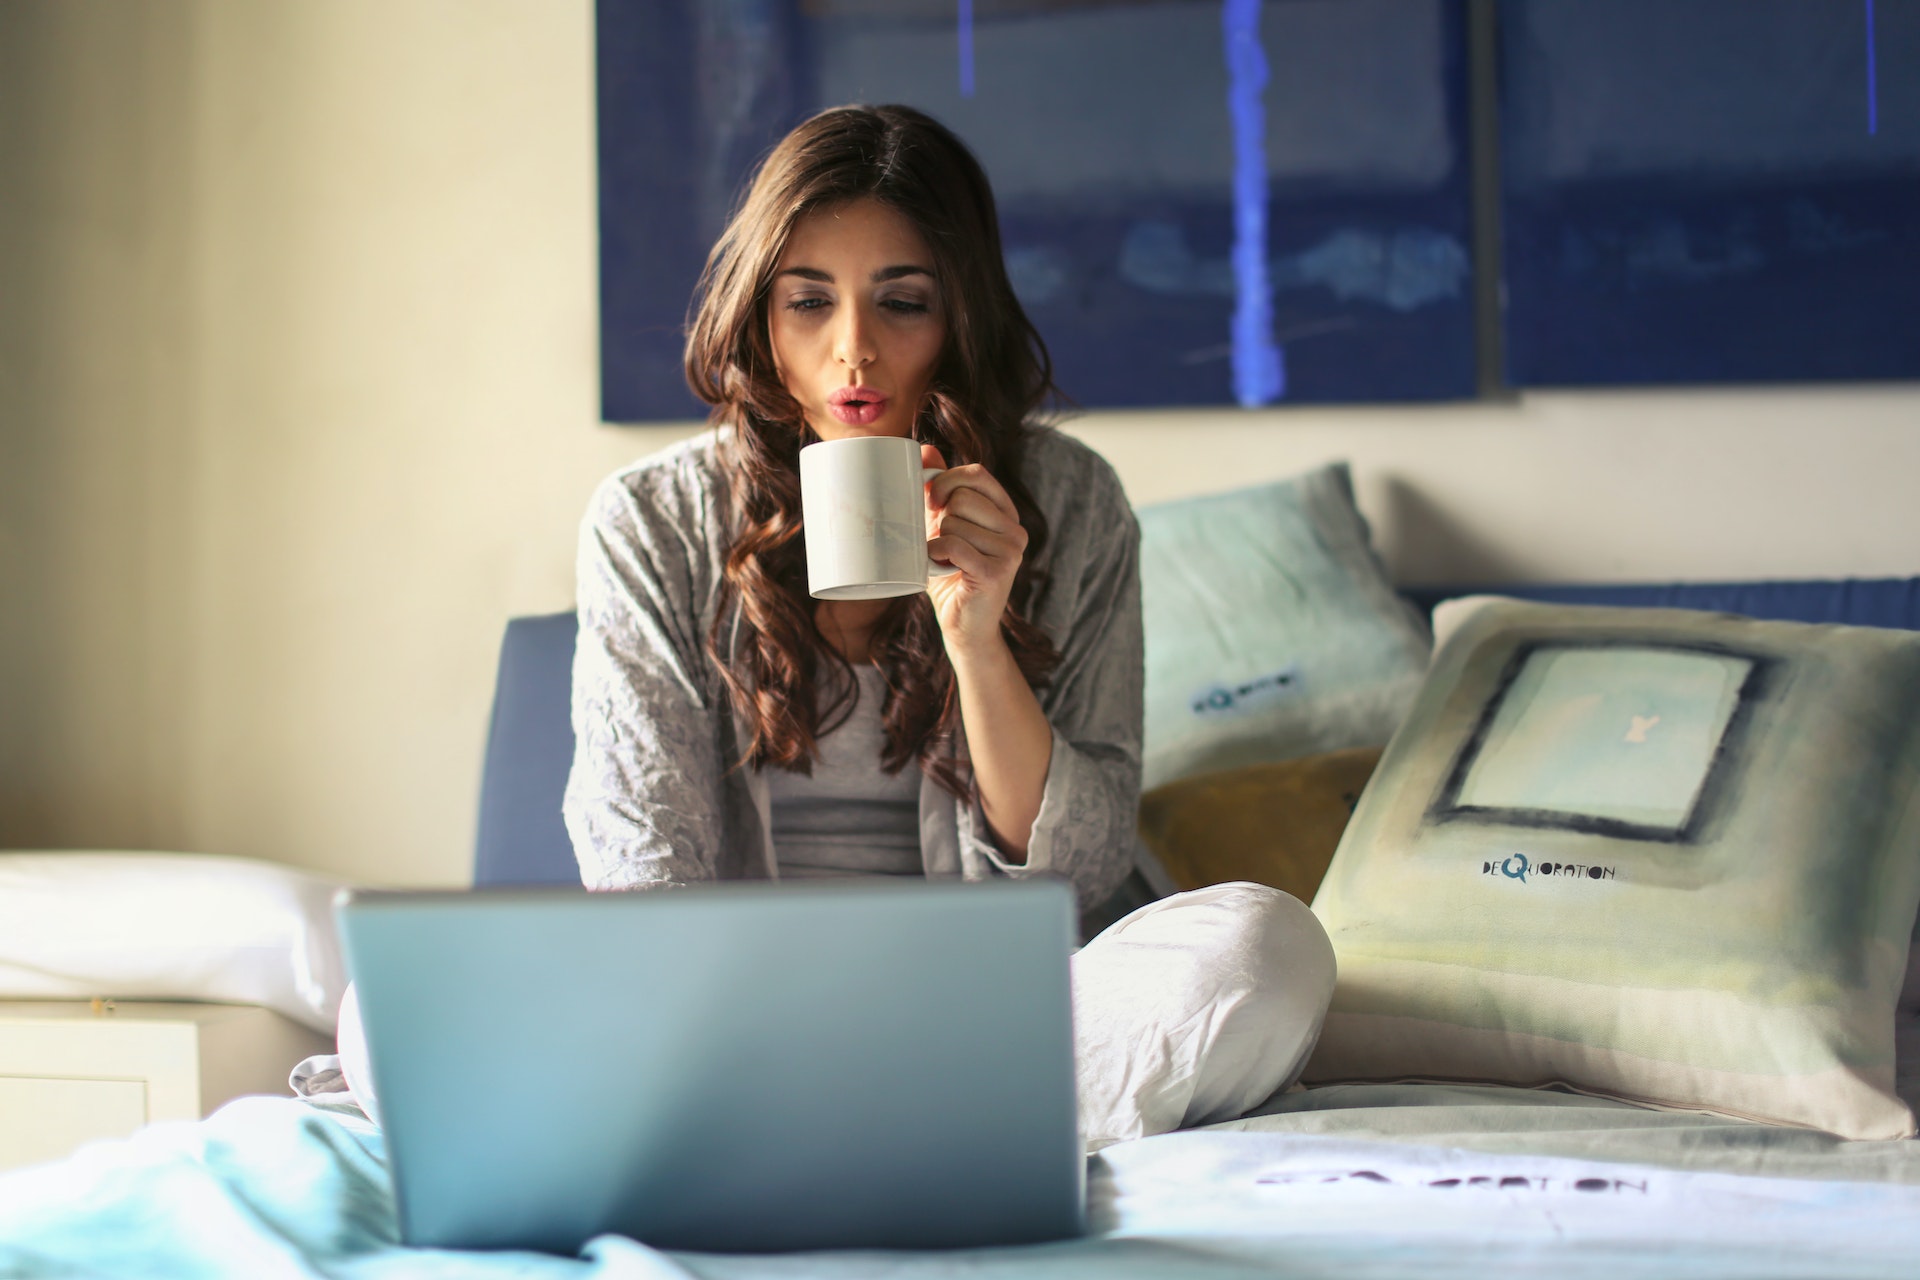 3 Ideas for Increasing Productivity When Working From Home